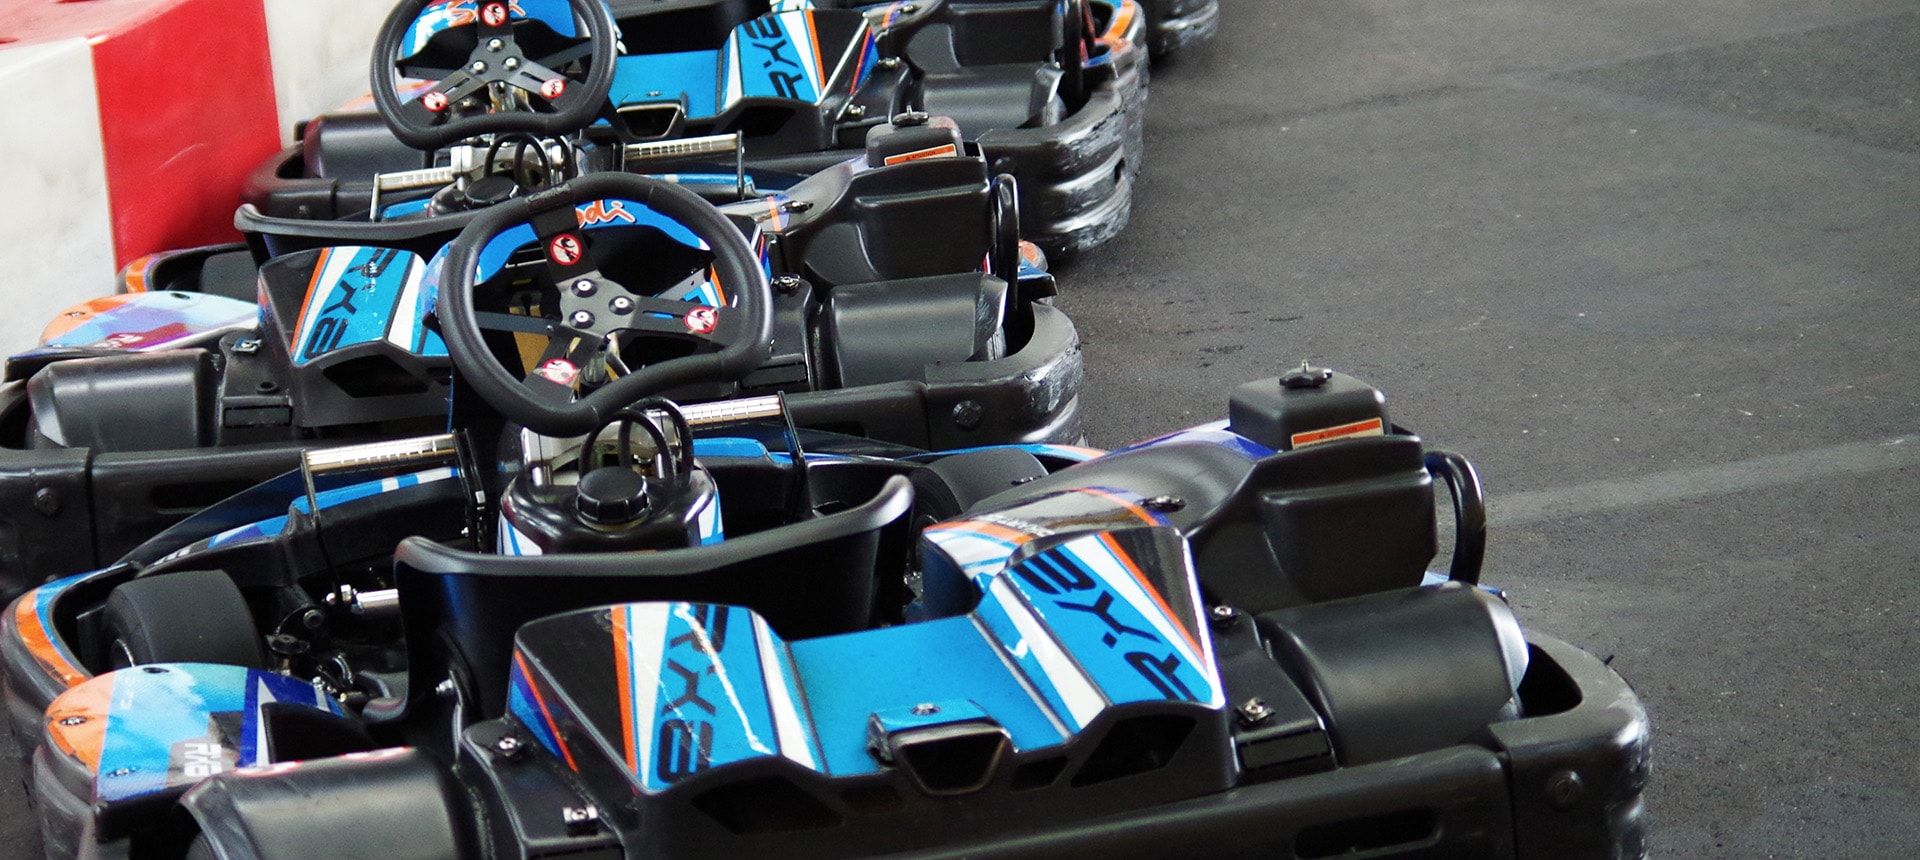 go-karts parked in a row